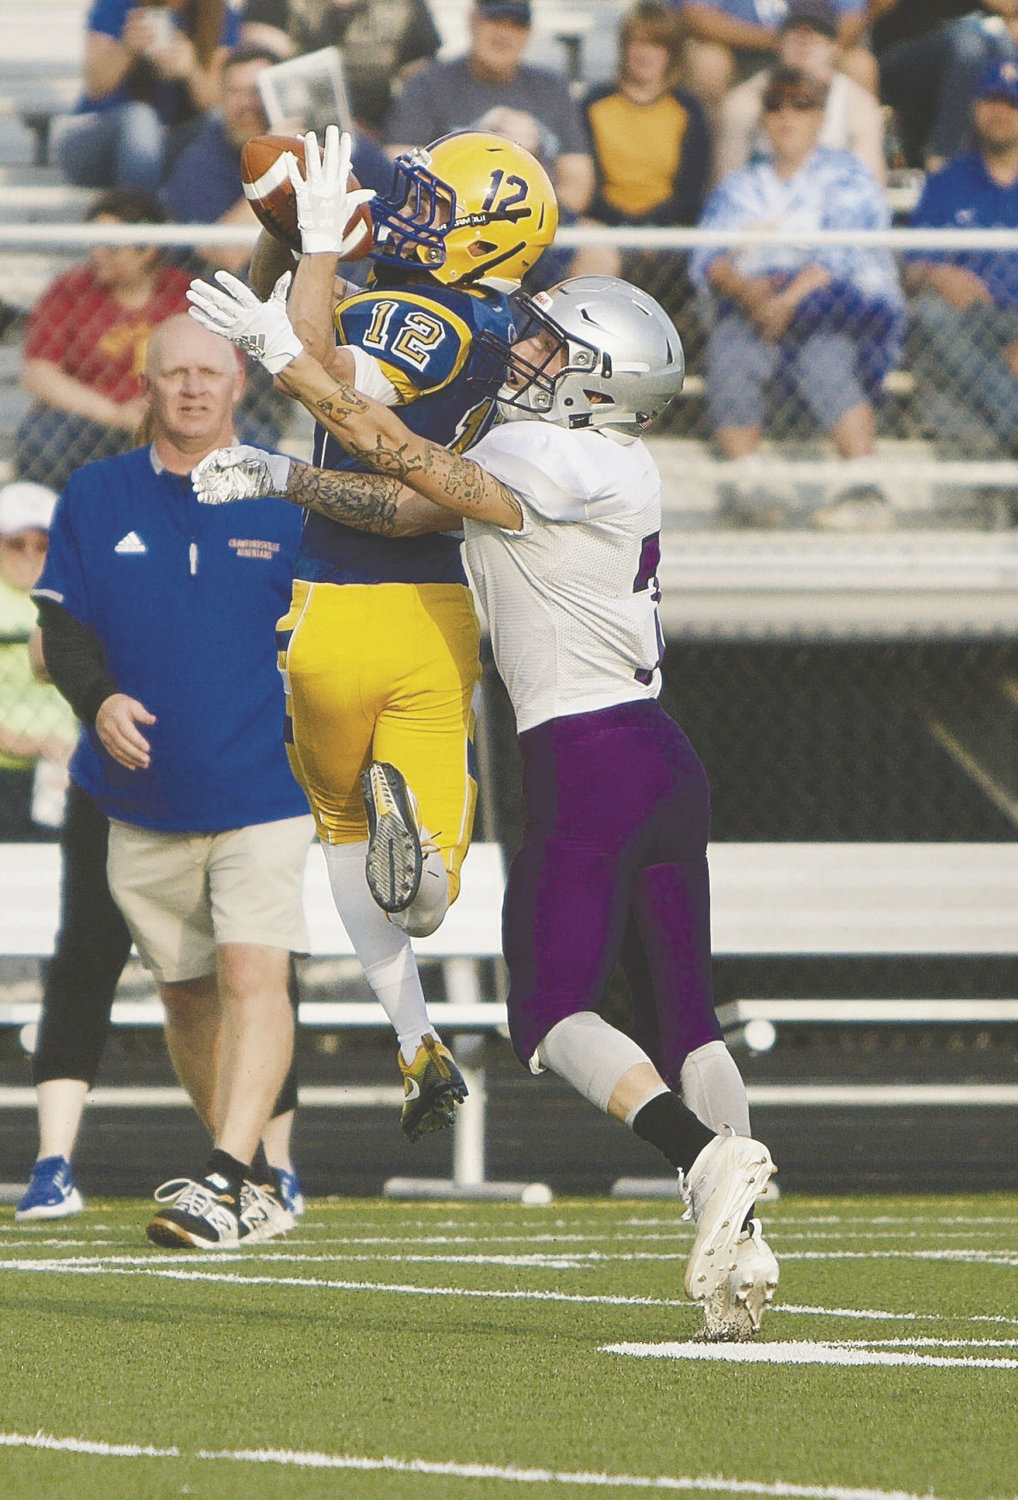 Crawfordsville's Andrew Martin snags a pass. The junior caught the Athenian's lone score on the night.